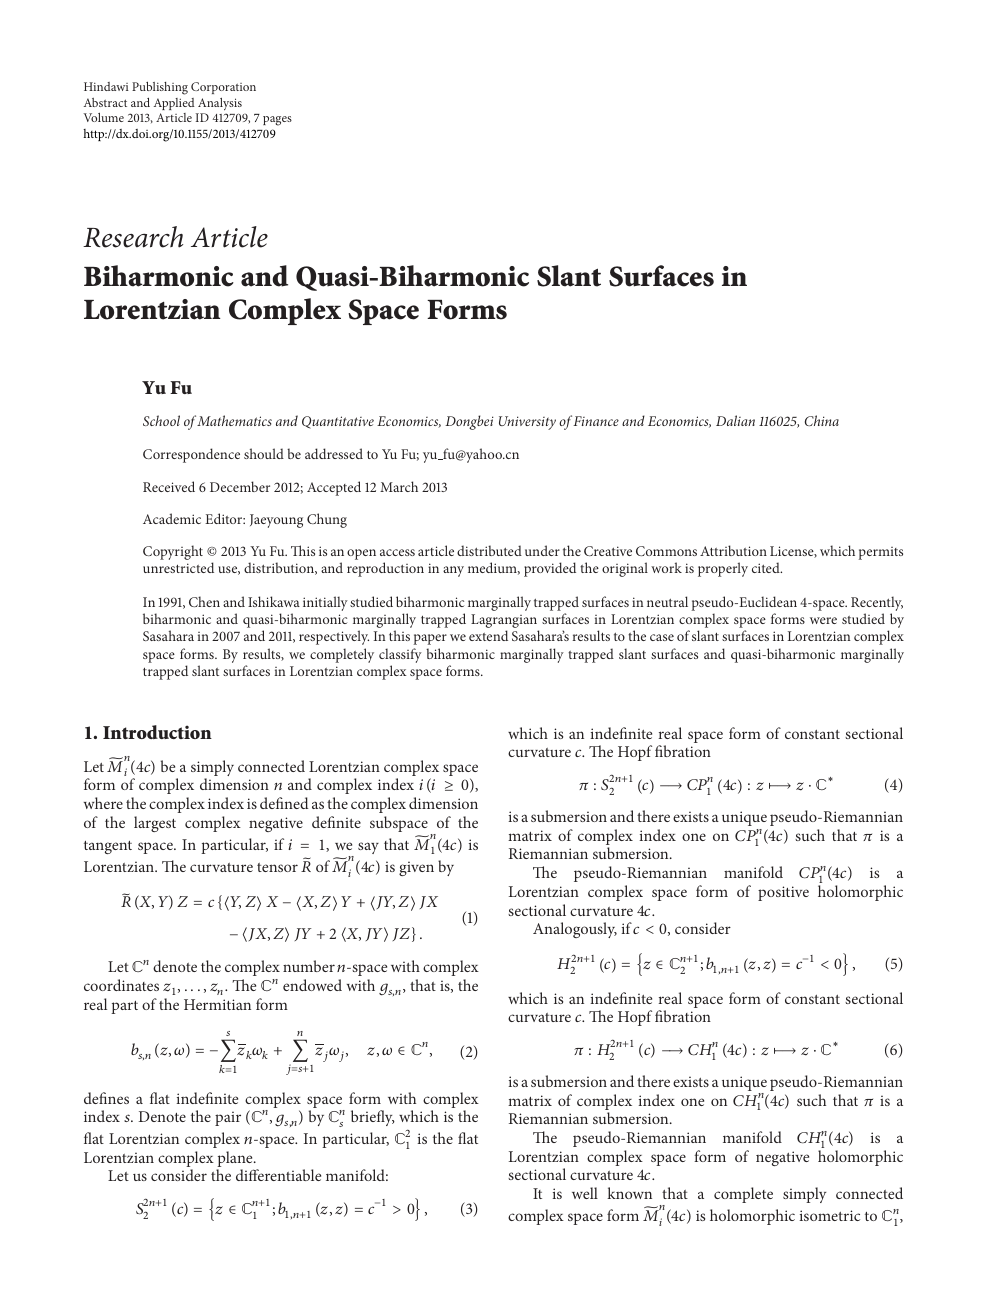 Biharmonic And Quasi Biharmonic Slant Surfaces In Lorentzian Complex Space Forms Topic Of Research Paper In Mathematics Download Scholarly Article Pdf And Read For Free On Cyberleninka Open Science Hub